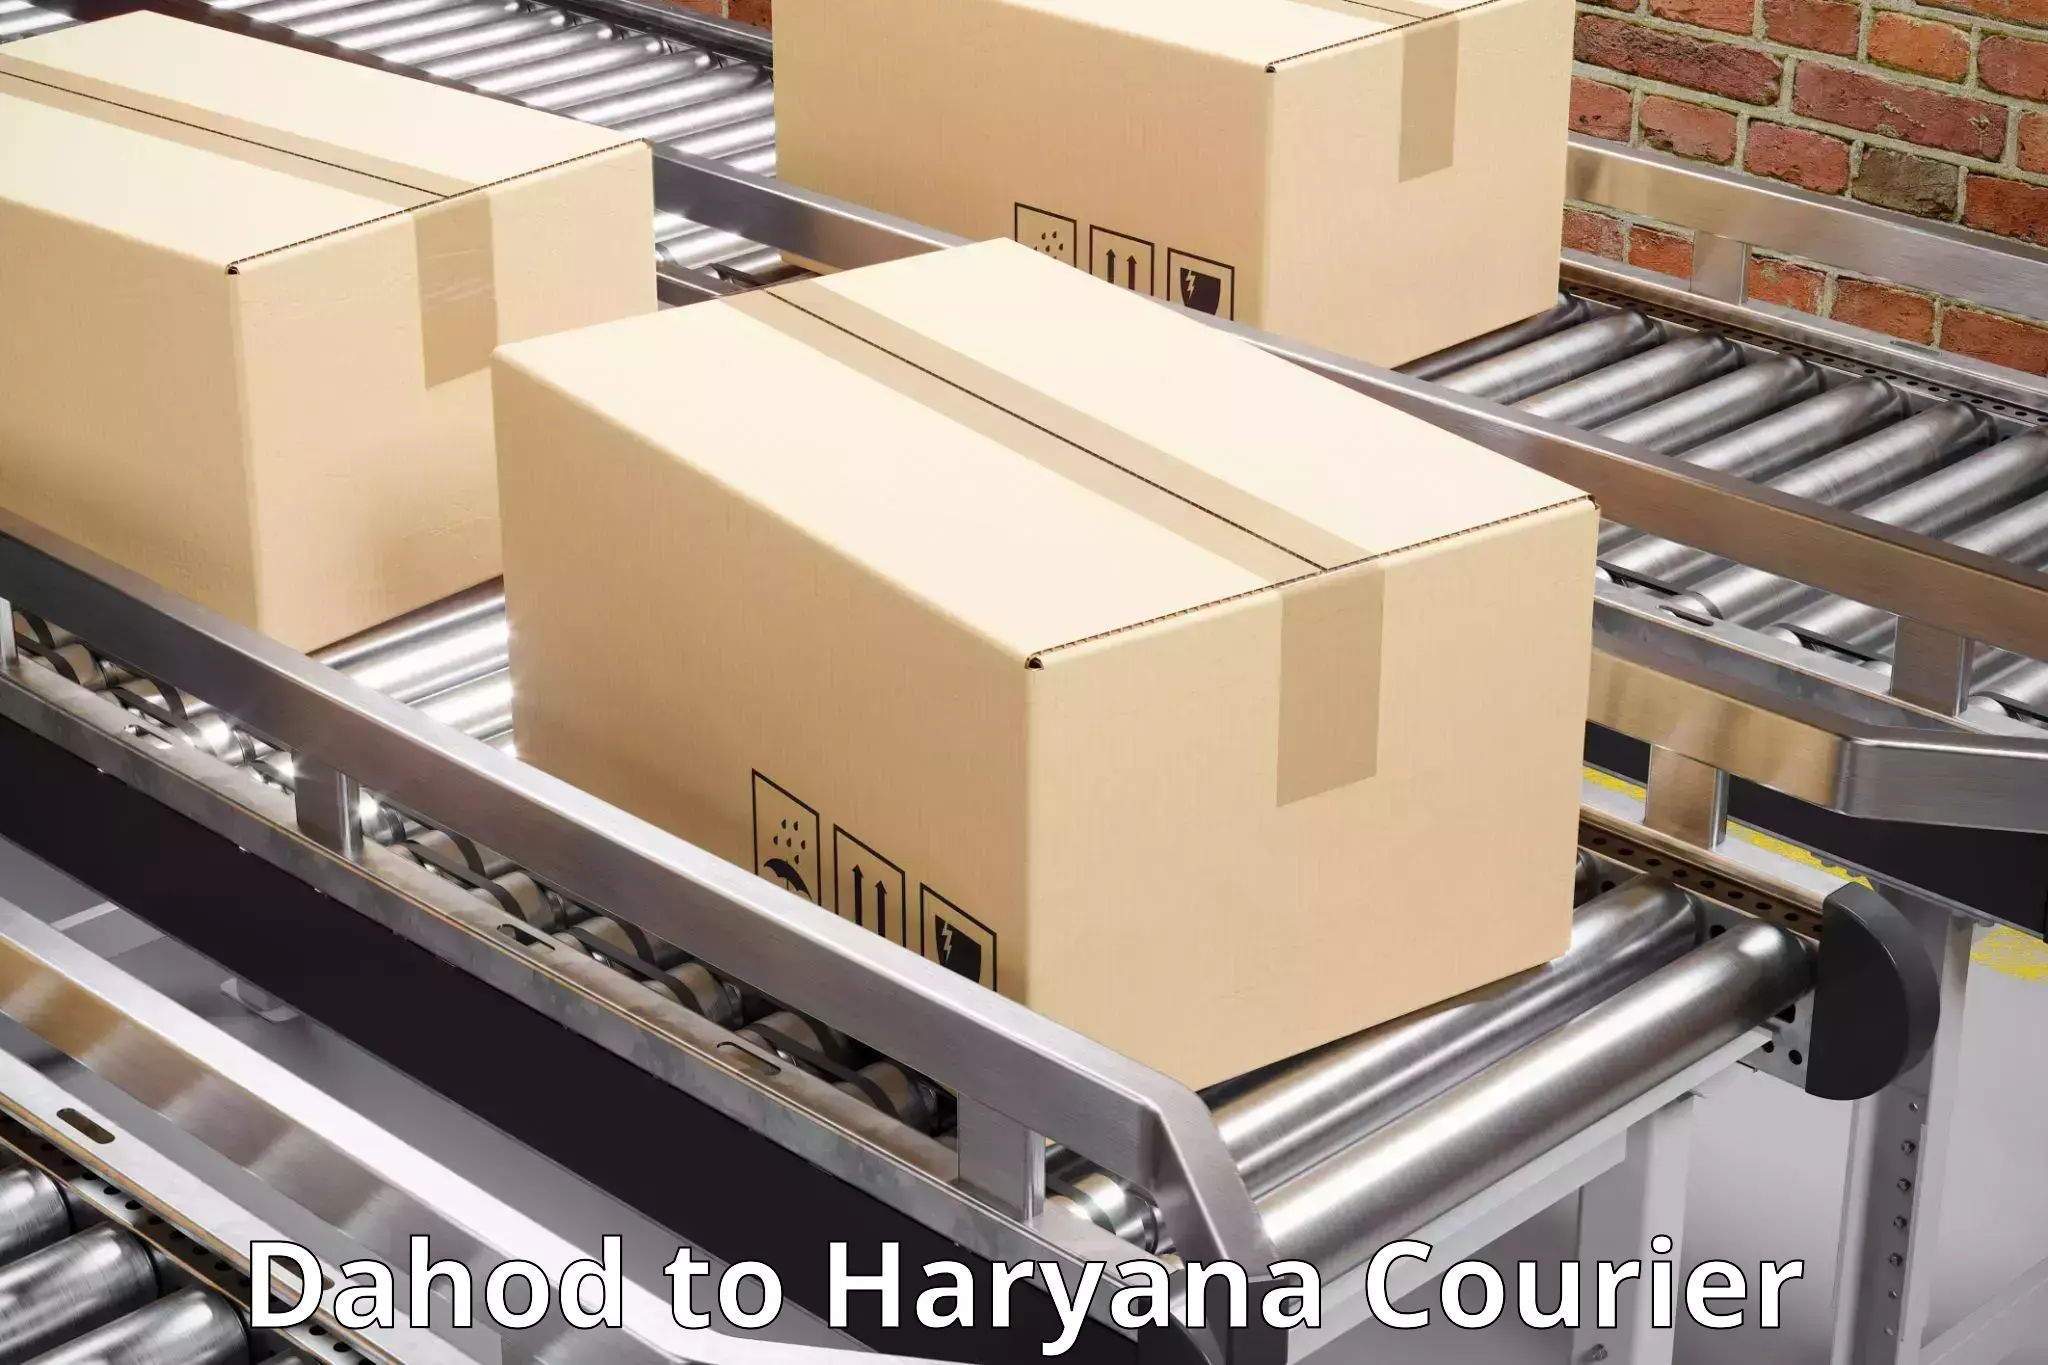 Same-day delivery solutions Dahod to Ambala